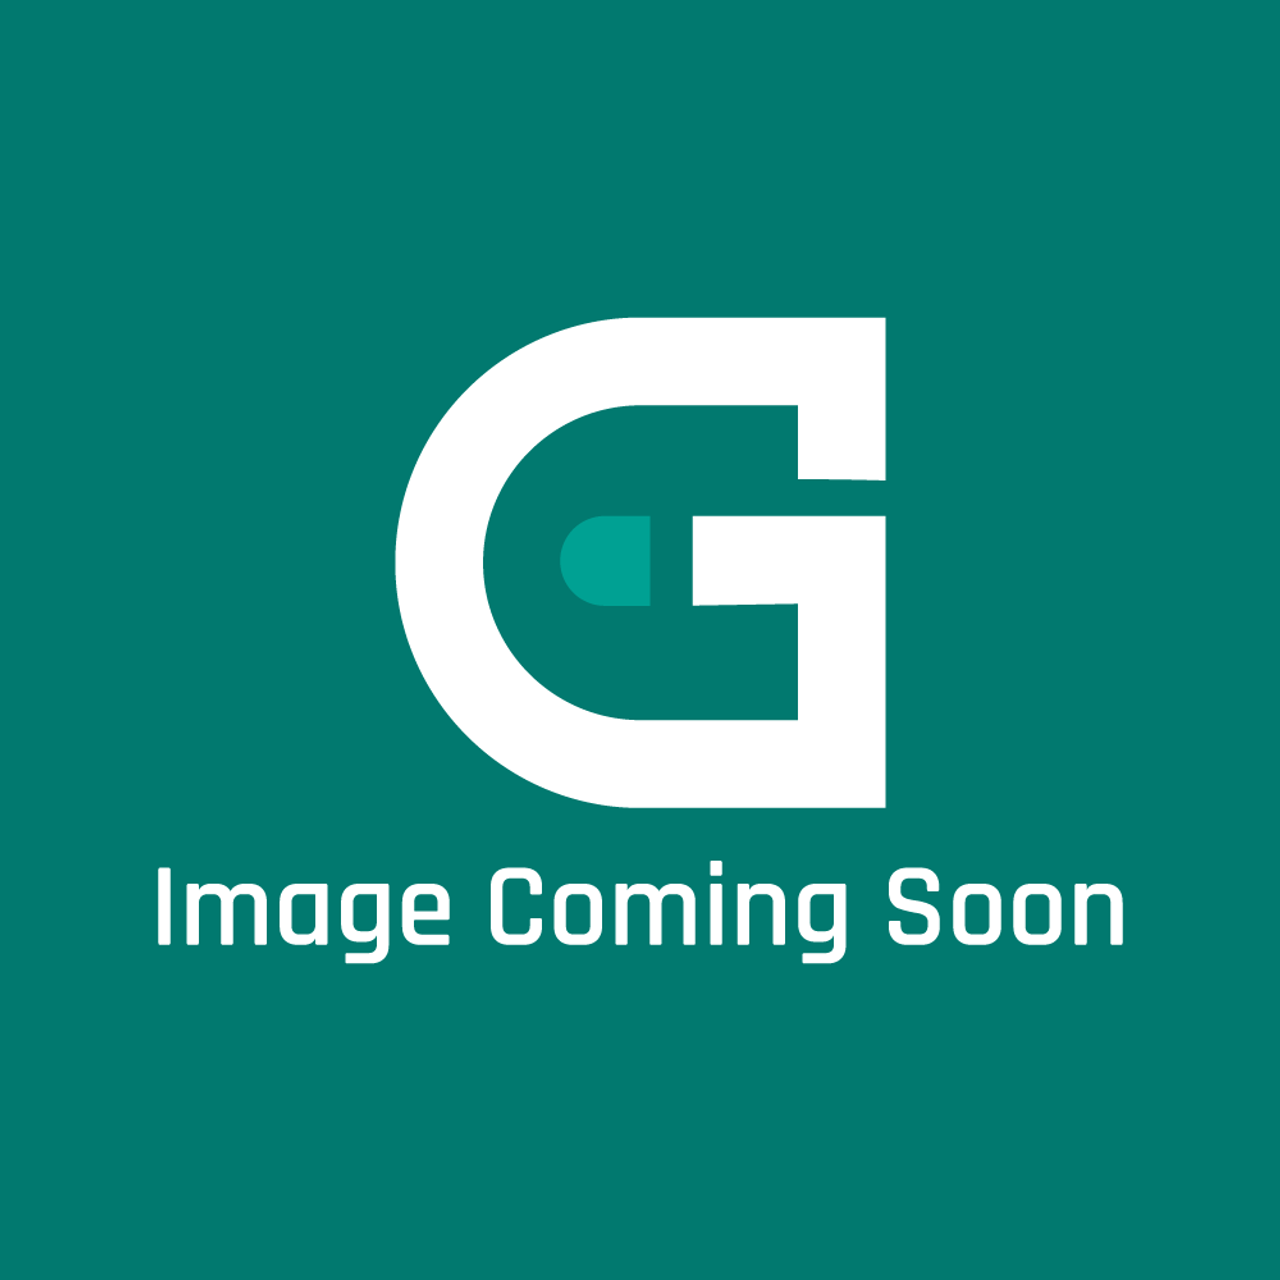 GE Appliances WB34K14 - Cvr Ignitor - Image Coming Soon!